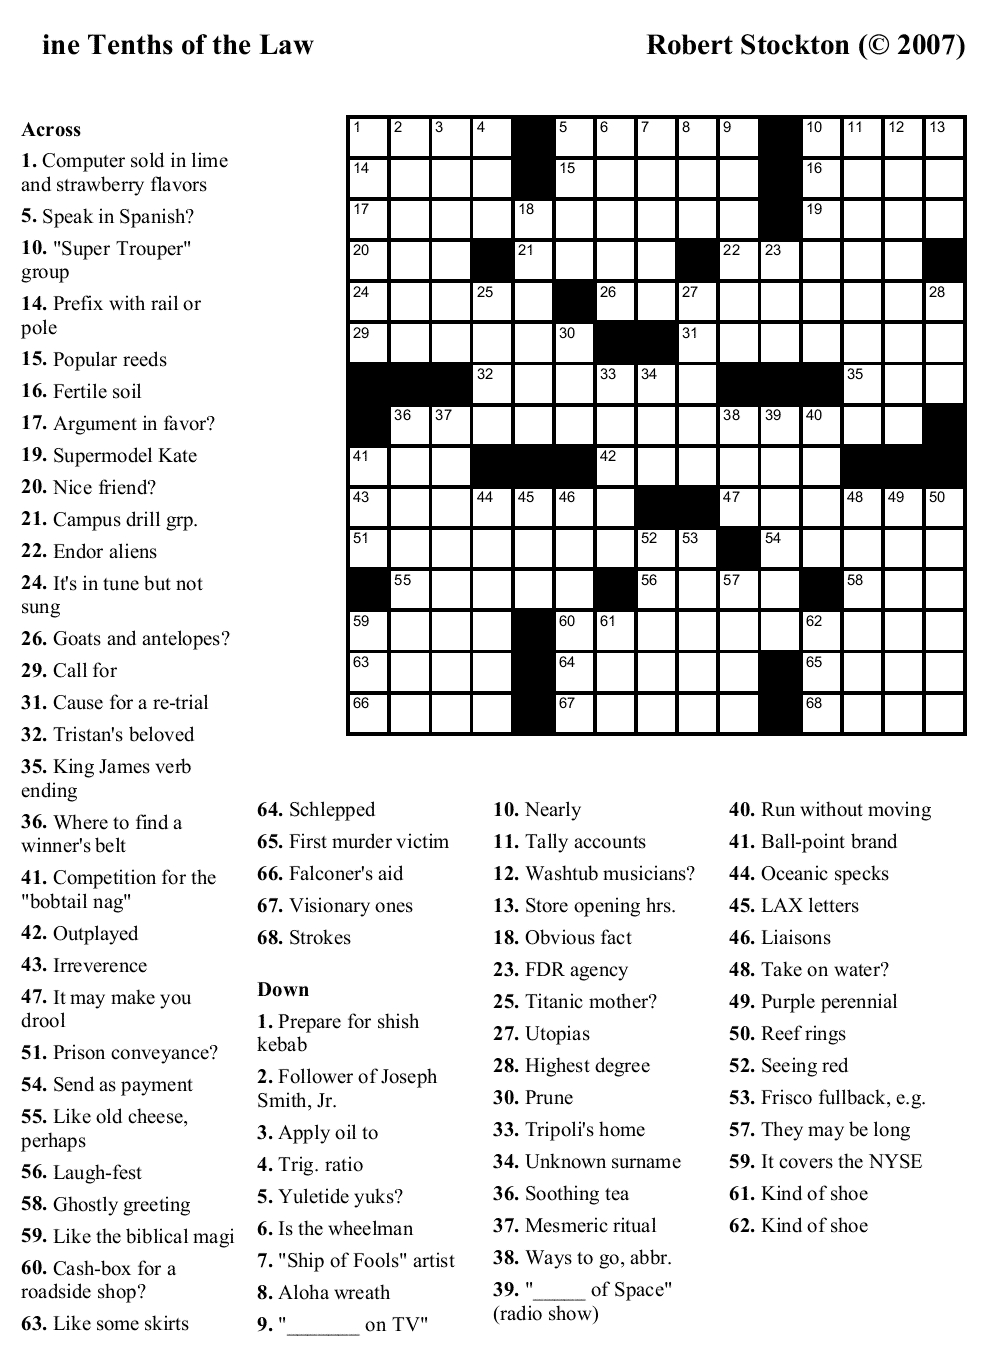 Crossword Puzzles Printable - Yahoo Image Search Results | Crossword - Free Printable Crossword Puzzle #1